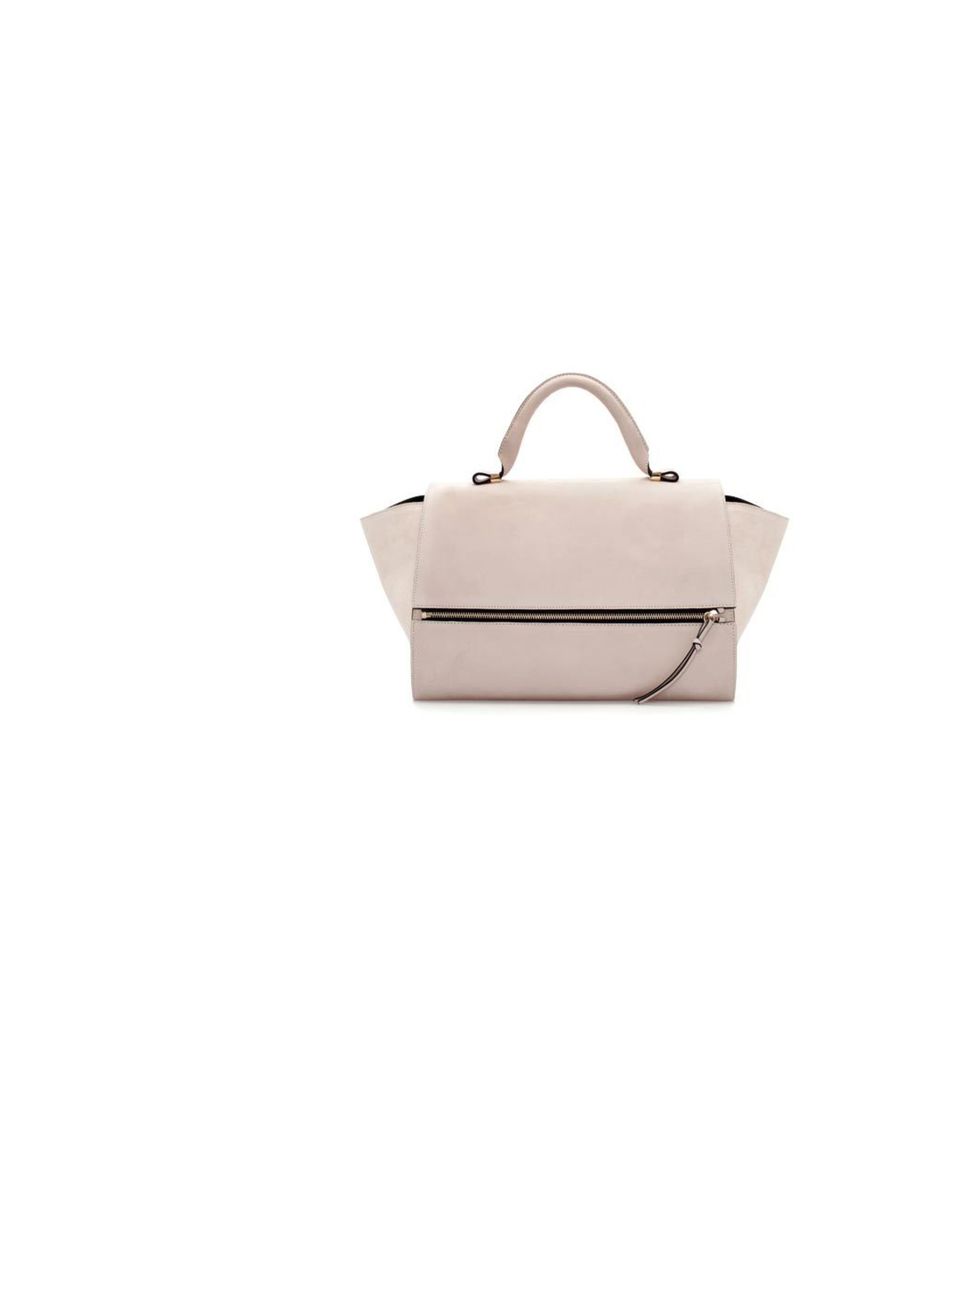 <p>Are you getting as carried away with <a href="http://www.zara.com/uk/en/woman/handbags/leather-citybag-with-foldover-flap-c269200p1467024.html">Zara</a>'s tote bag as we are? Thought so... £149</p>